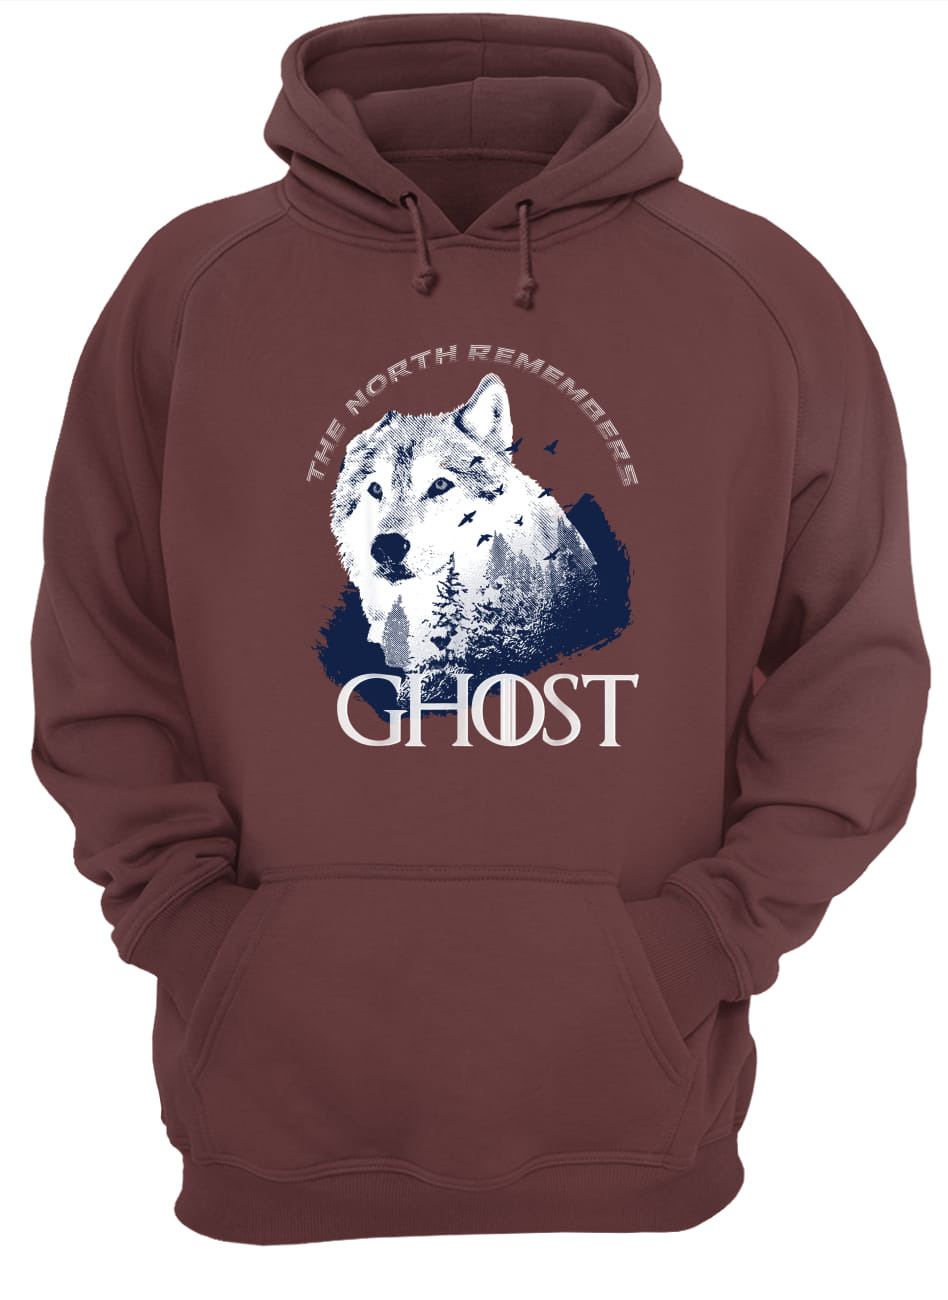 The north remember ghost game of thrones hoodie